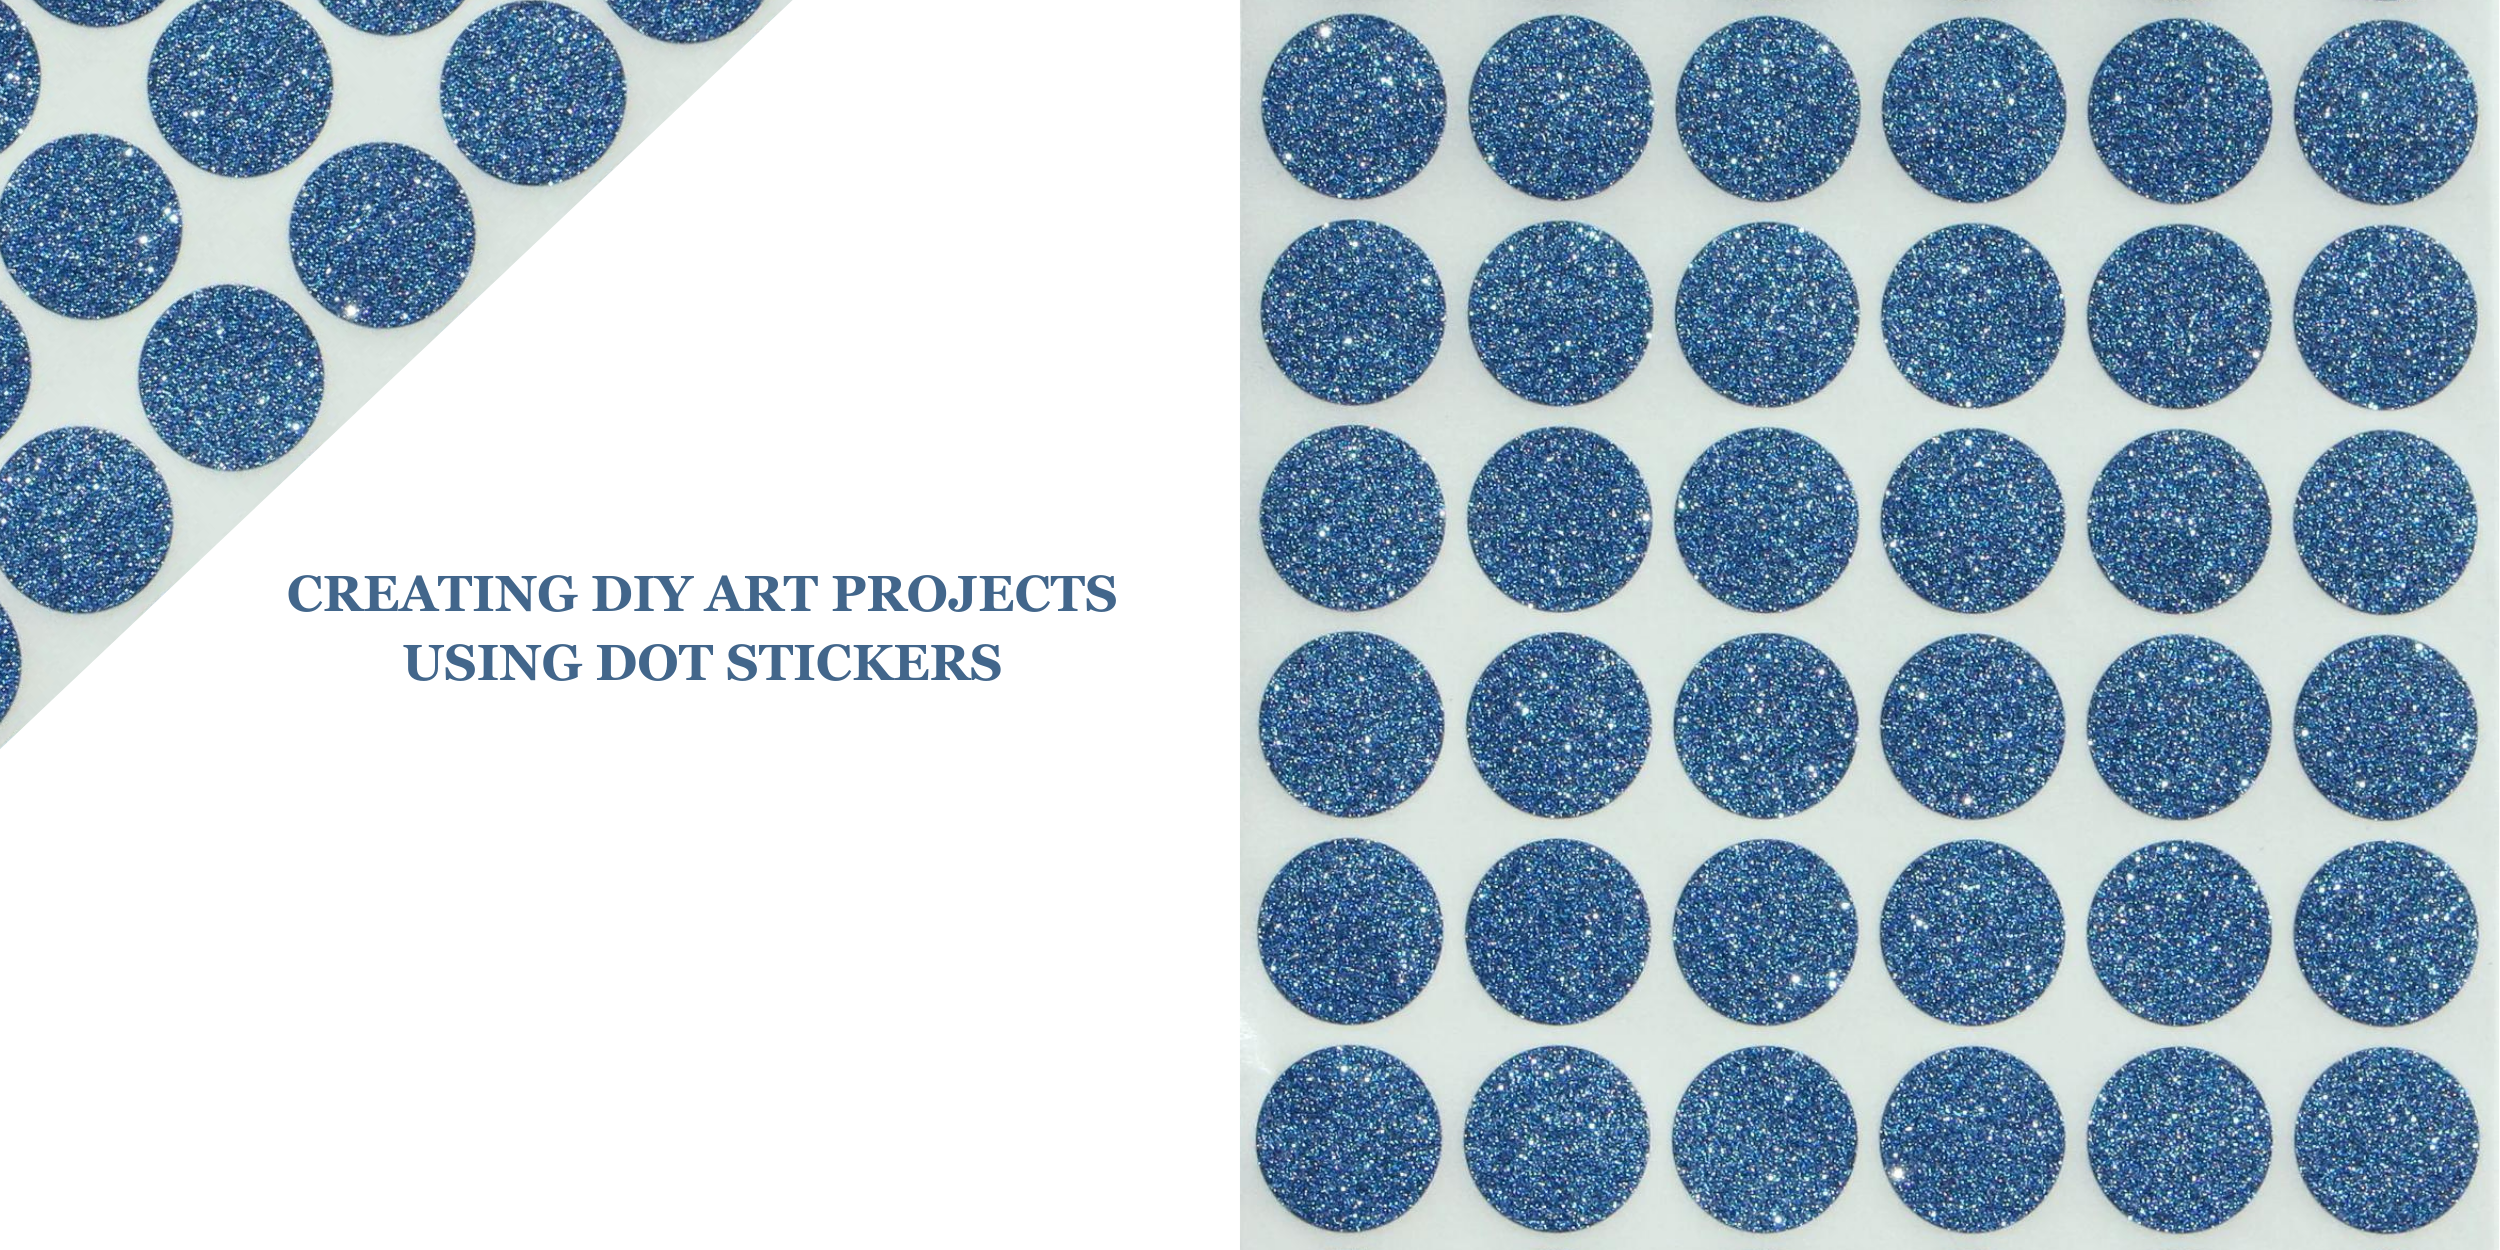 Creating DIY Art Projects Using Dot Stickers